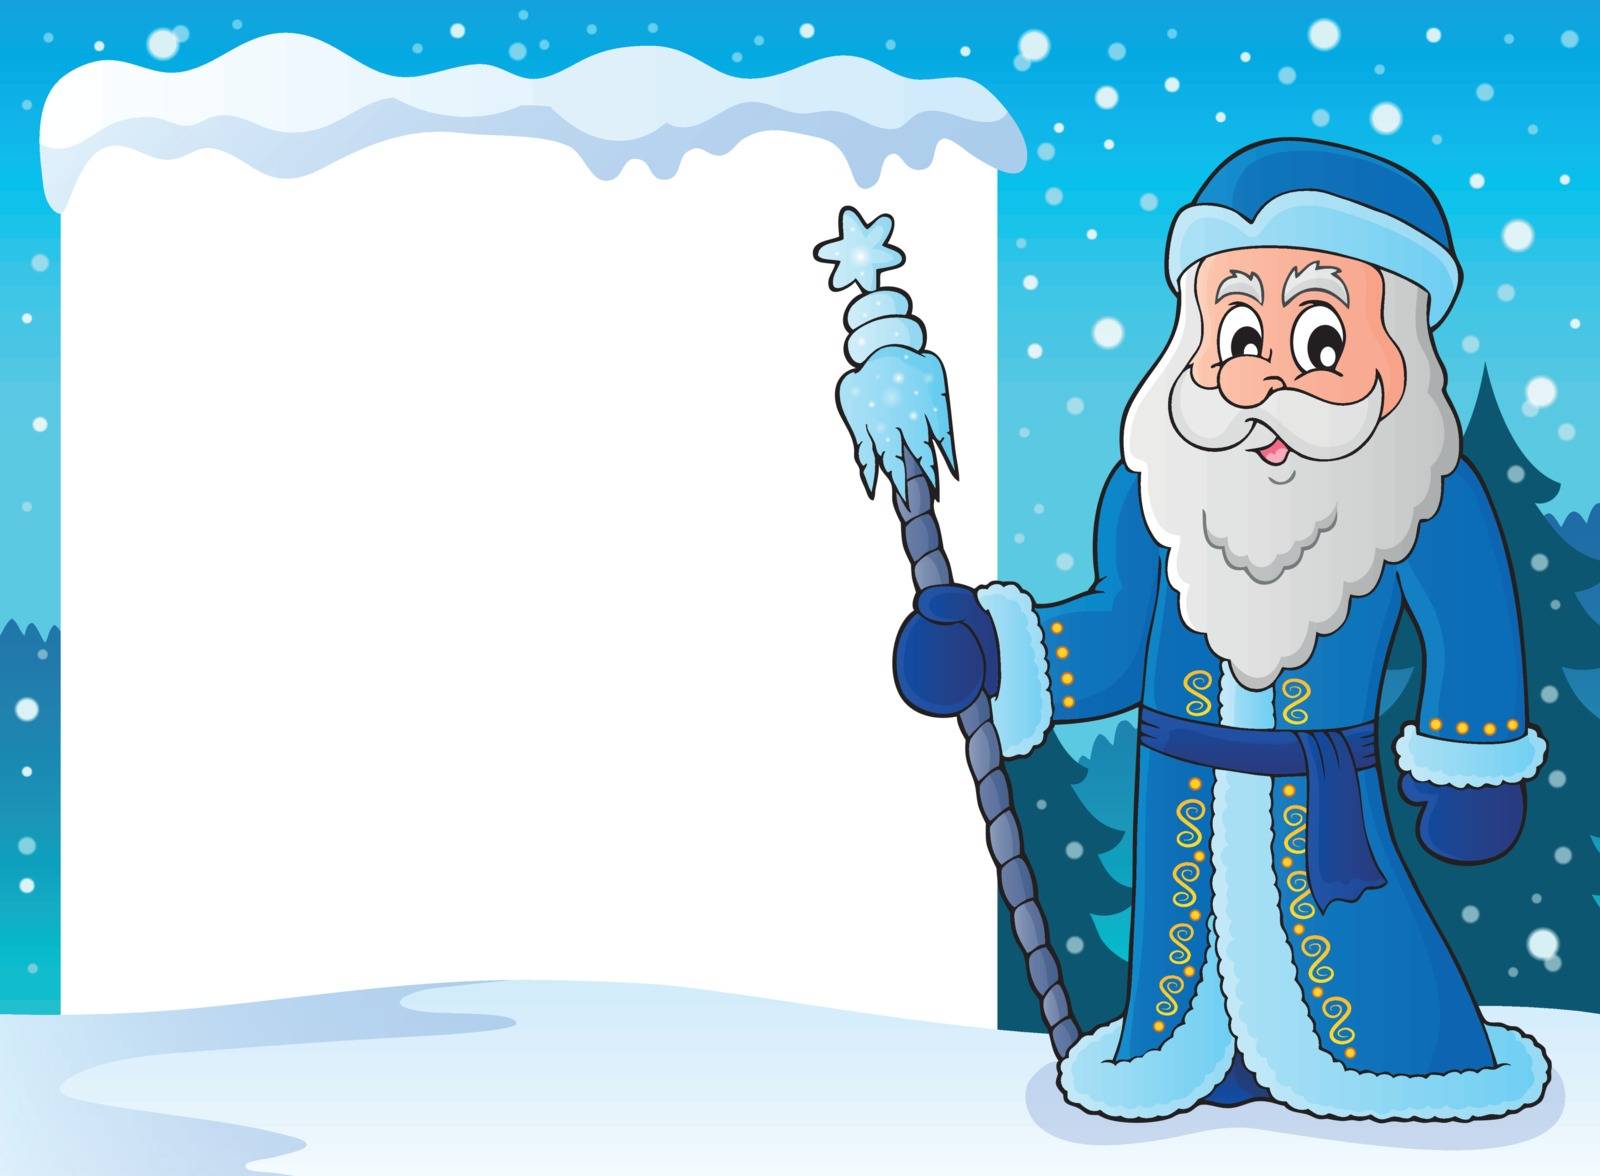 Snowy frame with Father Frost - eps10 vector illustration.